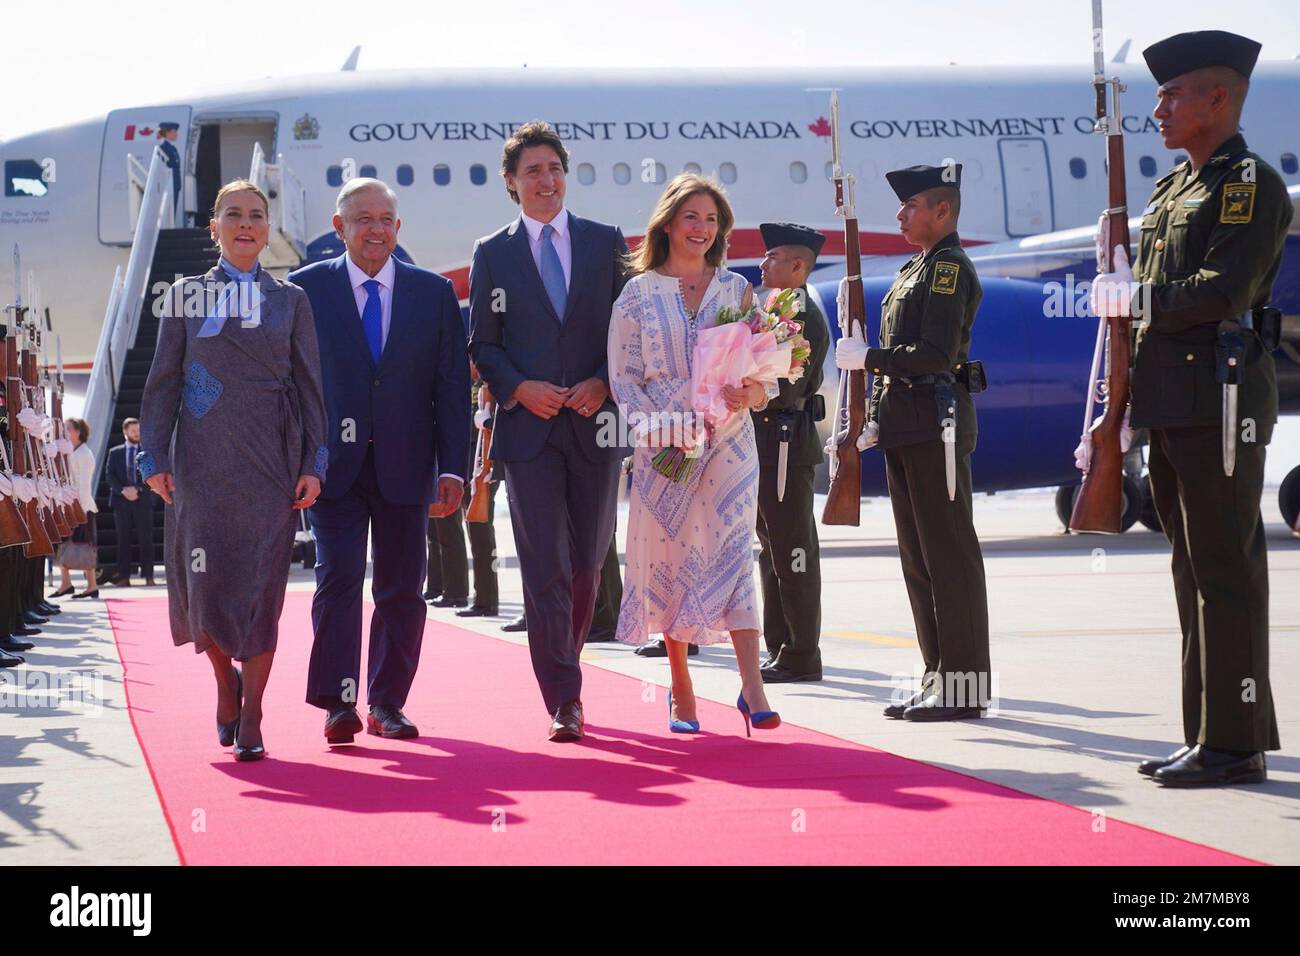 Mexico City, Mexico. 10th Jan, 2023. Canadian Prime Minister Justin Trudeau, center, and his wife Sophie Grégoire, right, are escorted by Mexican President Andres Manuel Lopez Obrador and wife Beatriz Gutiérrez Mülleron on arrival at Felipe Angeles International Airport, January 9, 2023 in Santa Lucia, Mexico. Biden is in Mexico to attend the North American Leaders Summit. Credit: Presidencia de la Republica Mexicana/Mexican Presidents Office/Alamy Live News Stock Photo